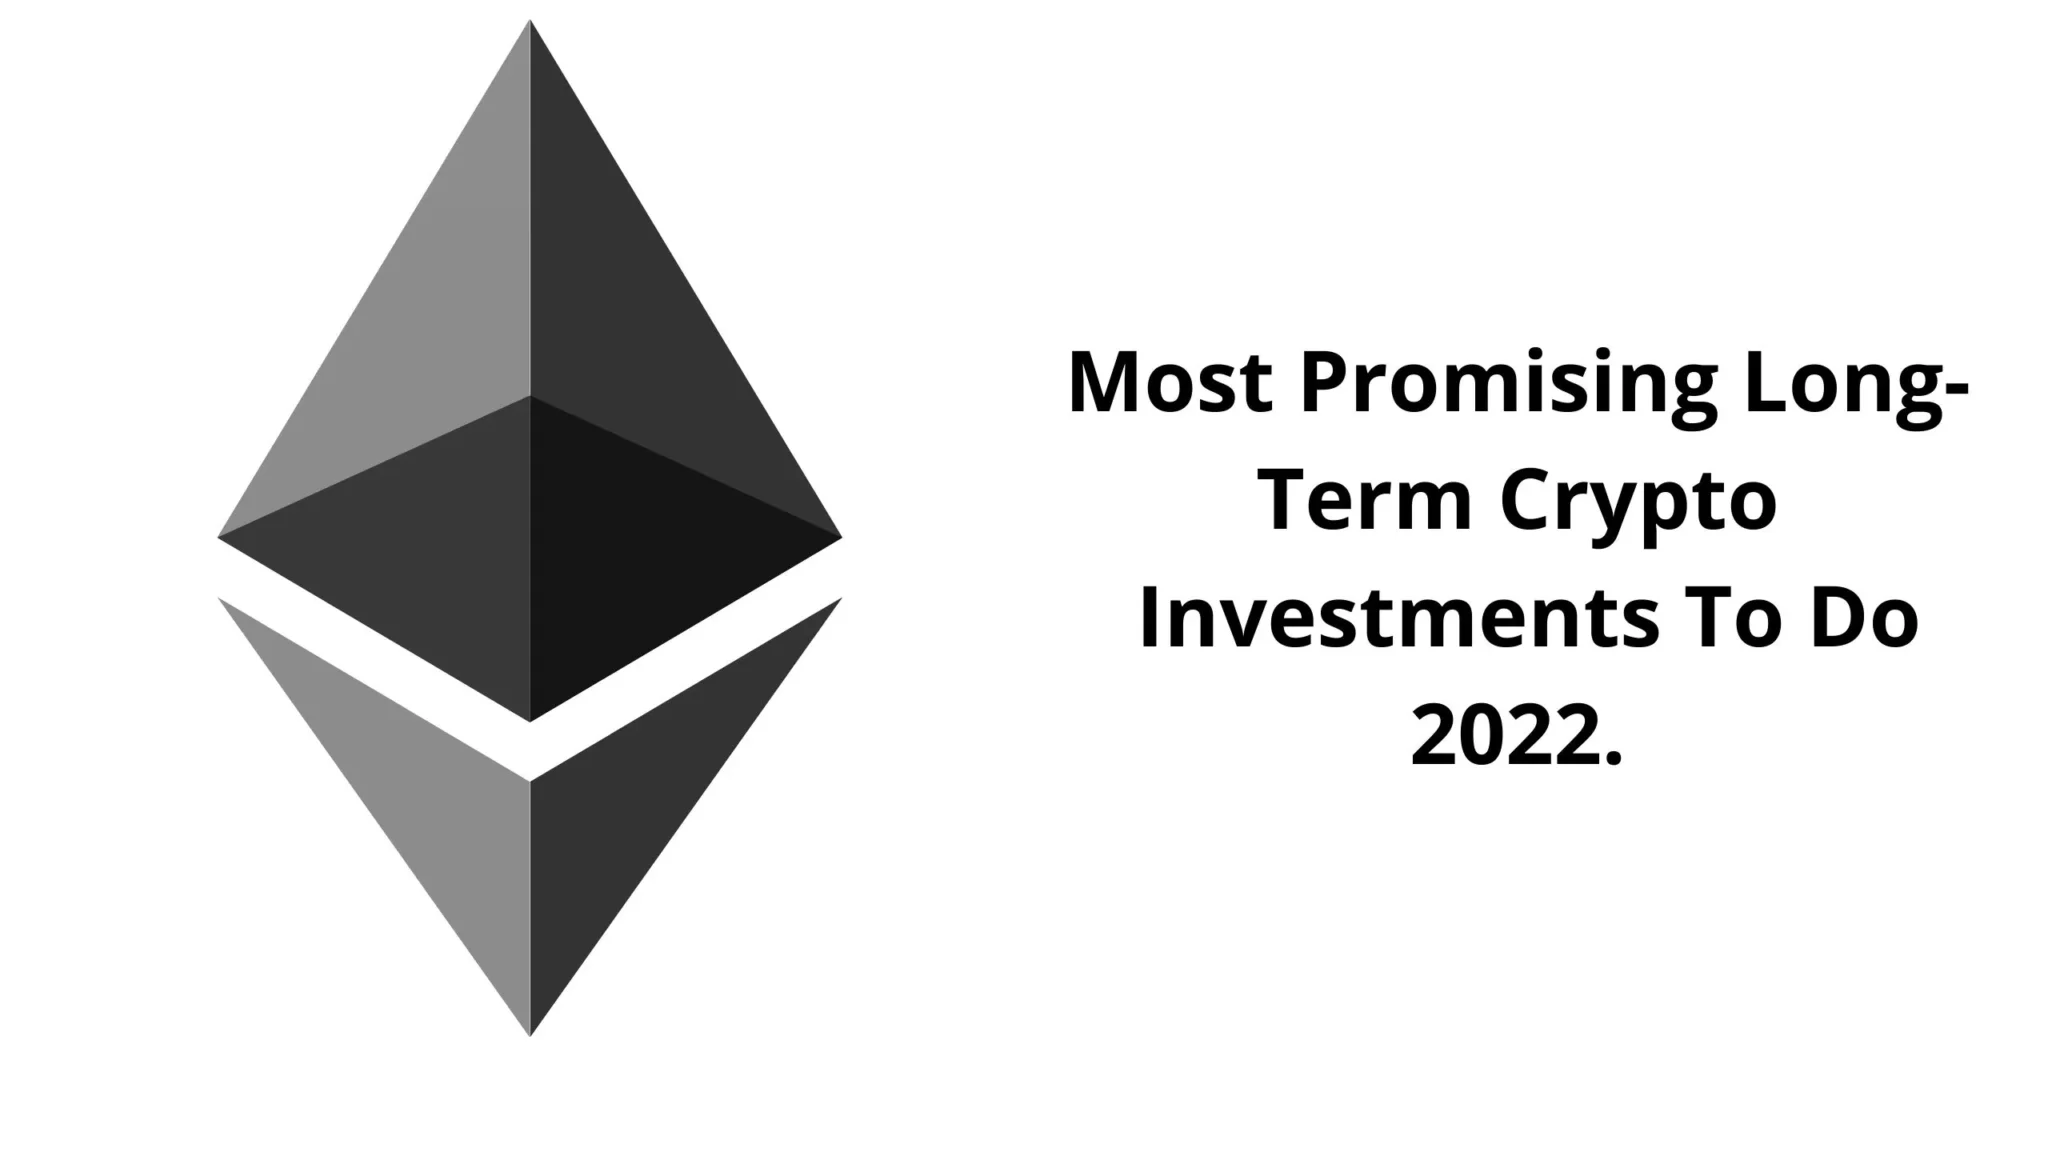 Most Promising Long-Term Crypto Investments To Do 2022.